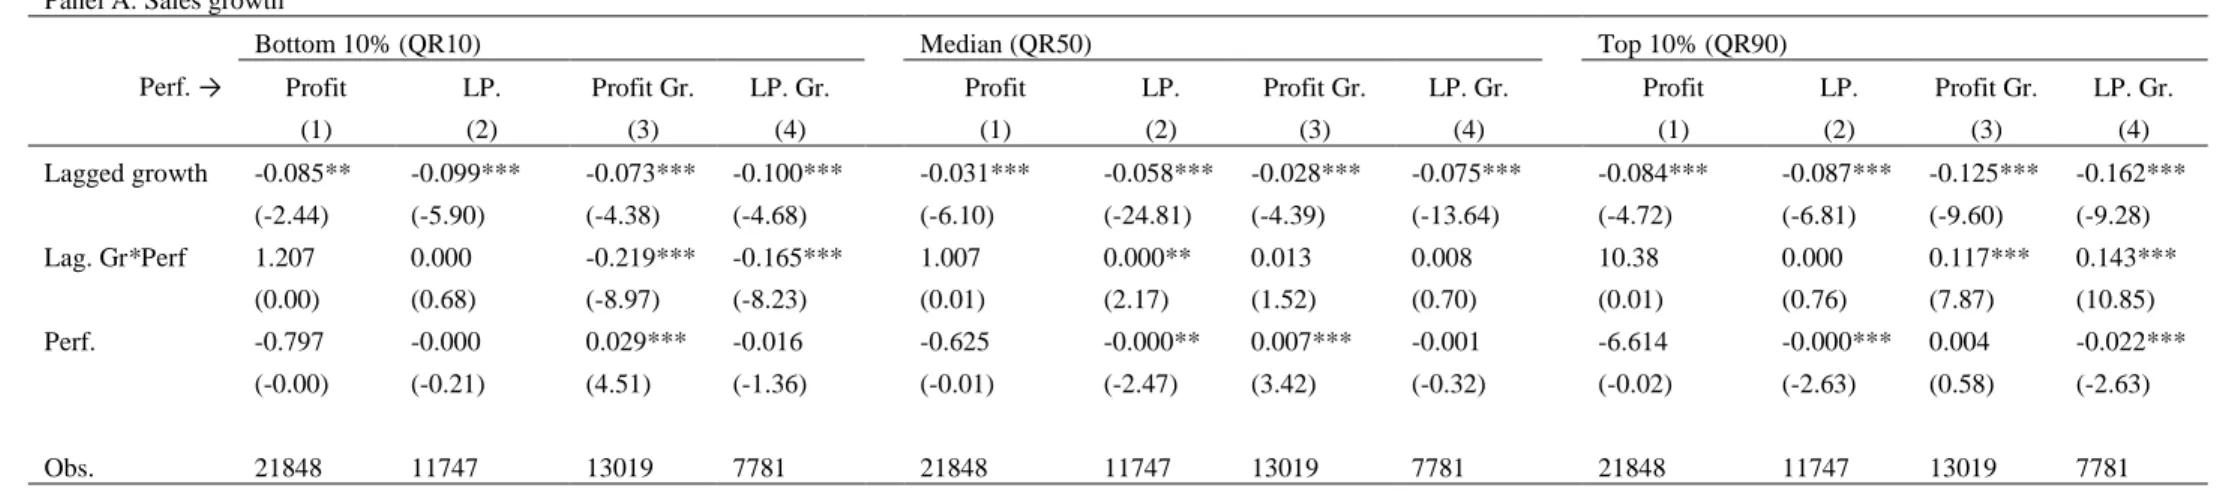 Table 5: Quantile regression estimations with interactions between lagged growth rate and performance indicators  